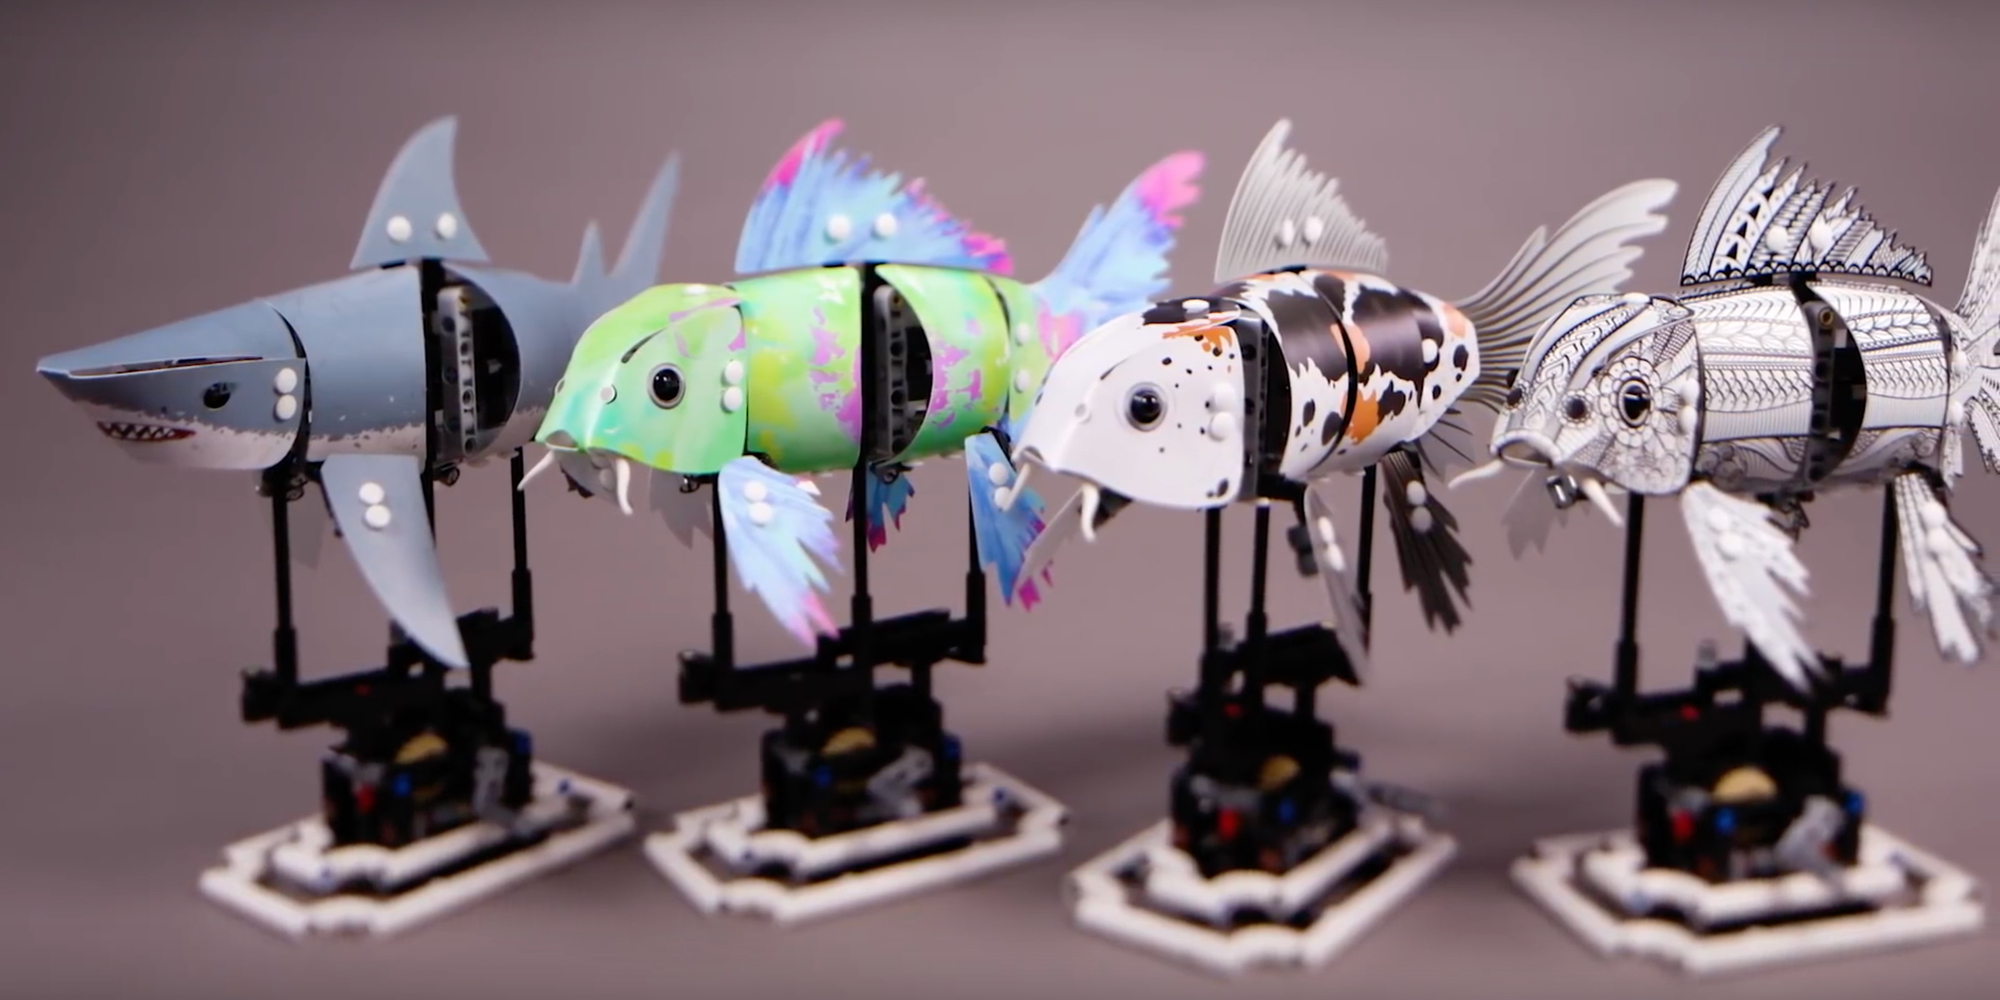 ydre Byttehandel sæt LEGO takes to Indiegogo to release upcoming 300-piece Forma Koi Fish set